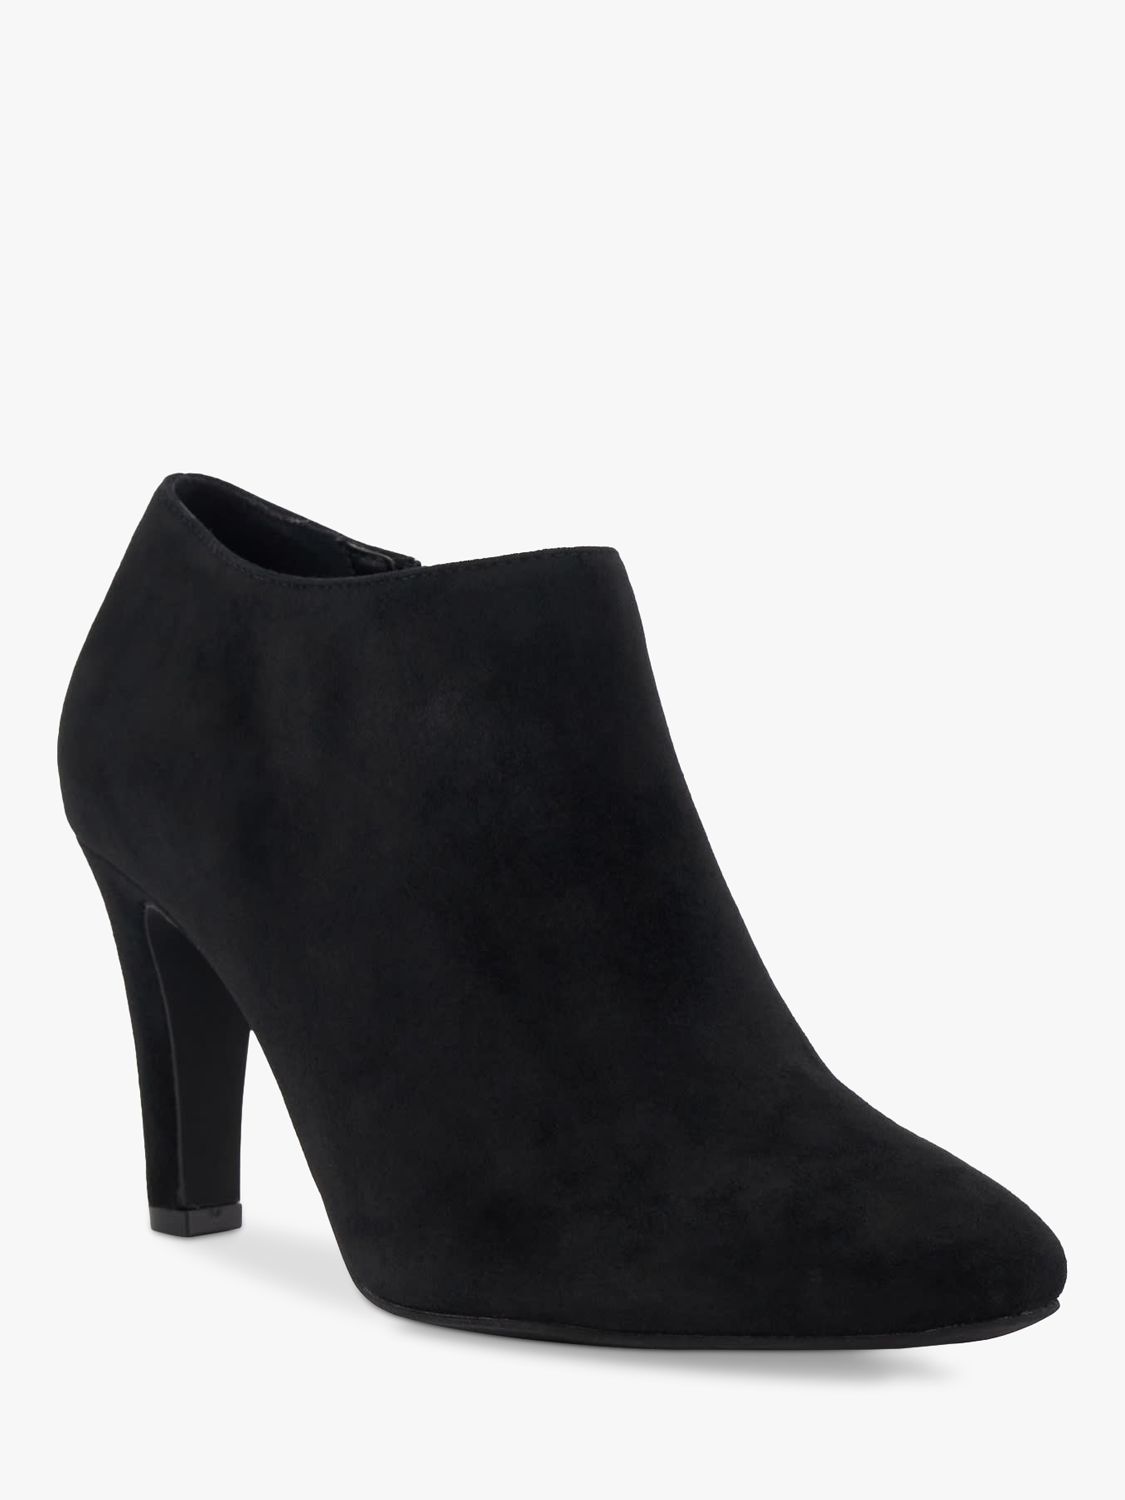 Dune Opinion High Heel Suede Shoe Boots, Black at John Lewis & Partners